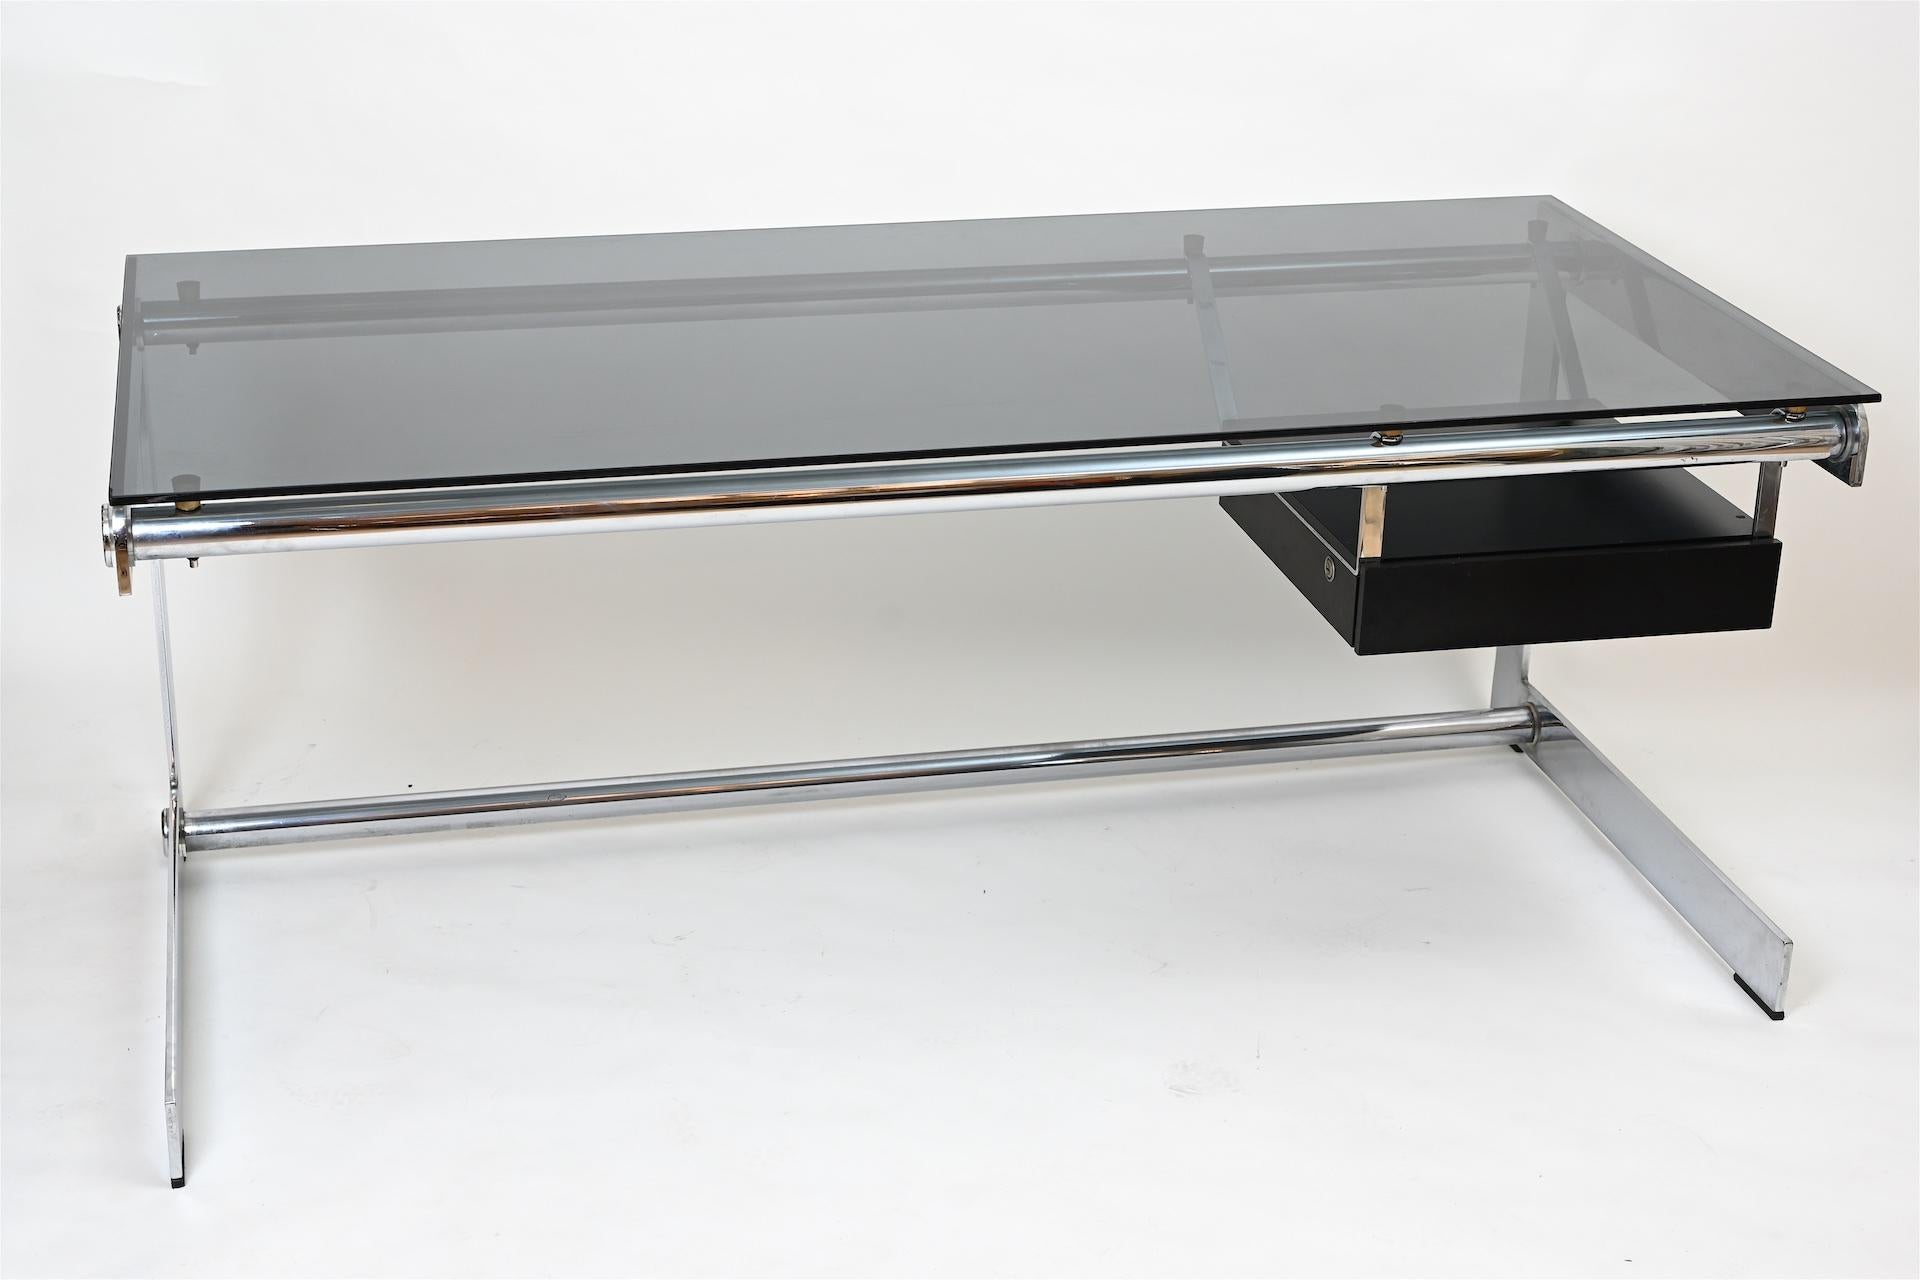 Midcentury French desk... The larger of this model 180 cm x 87.5 (depth)

Sleek Minimalist desk in chrome and glass with a single suspended drawer. By French architect Gilez Bouchez, circa 1965.